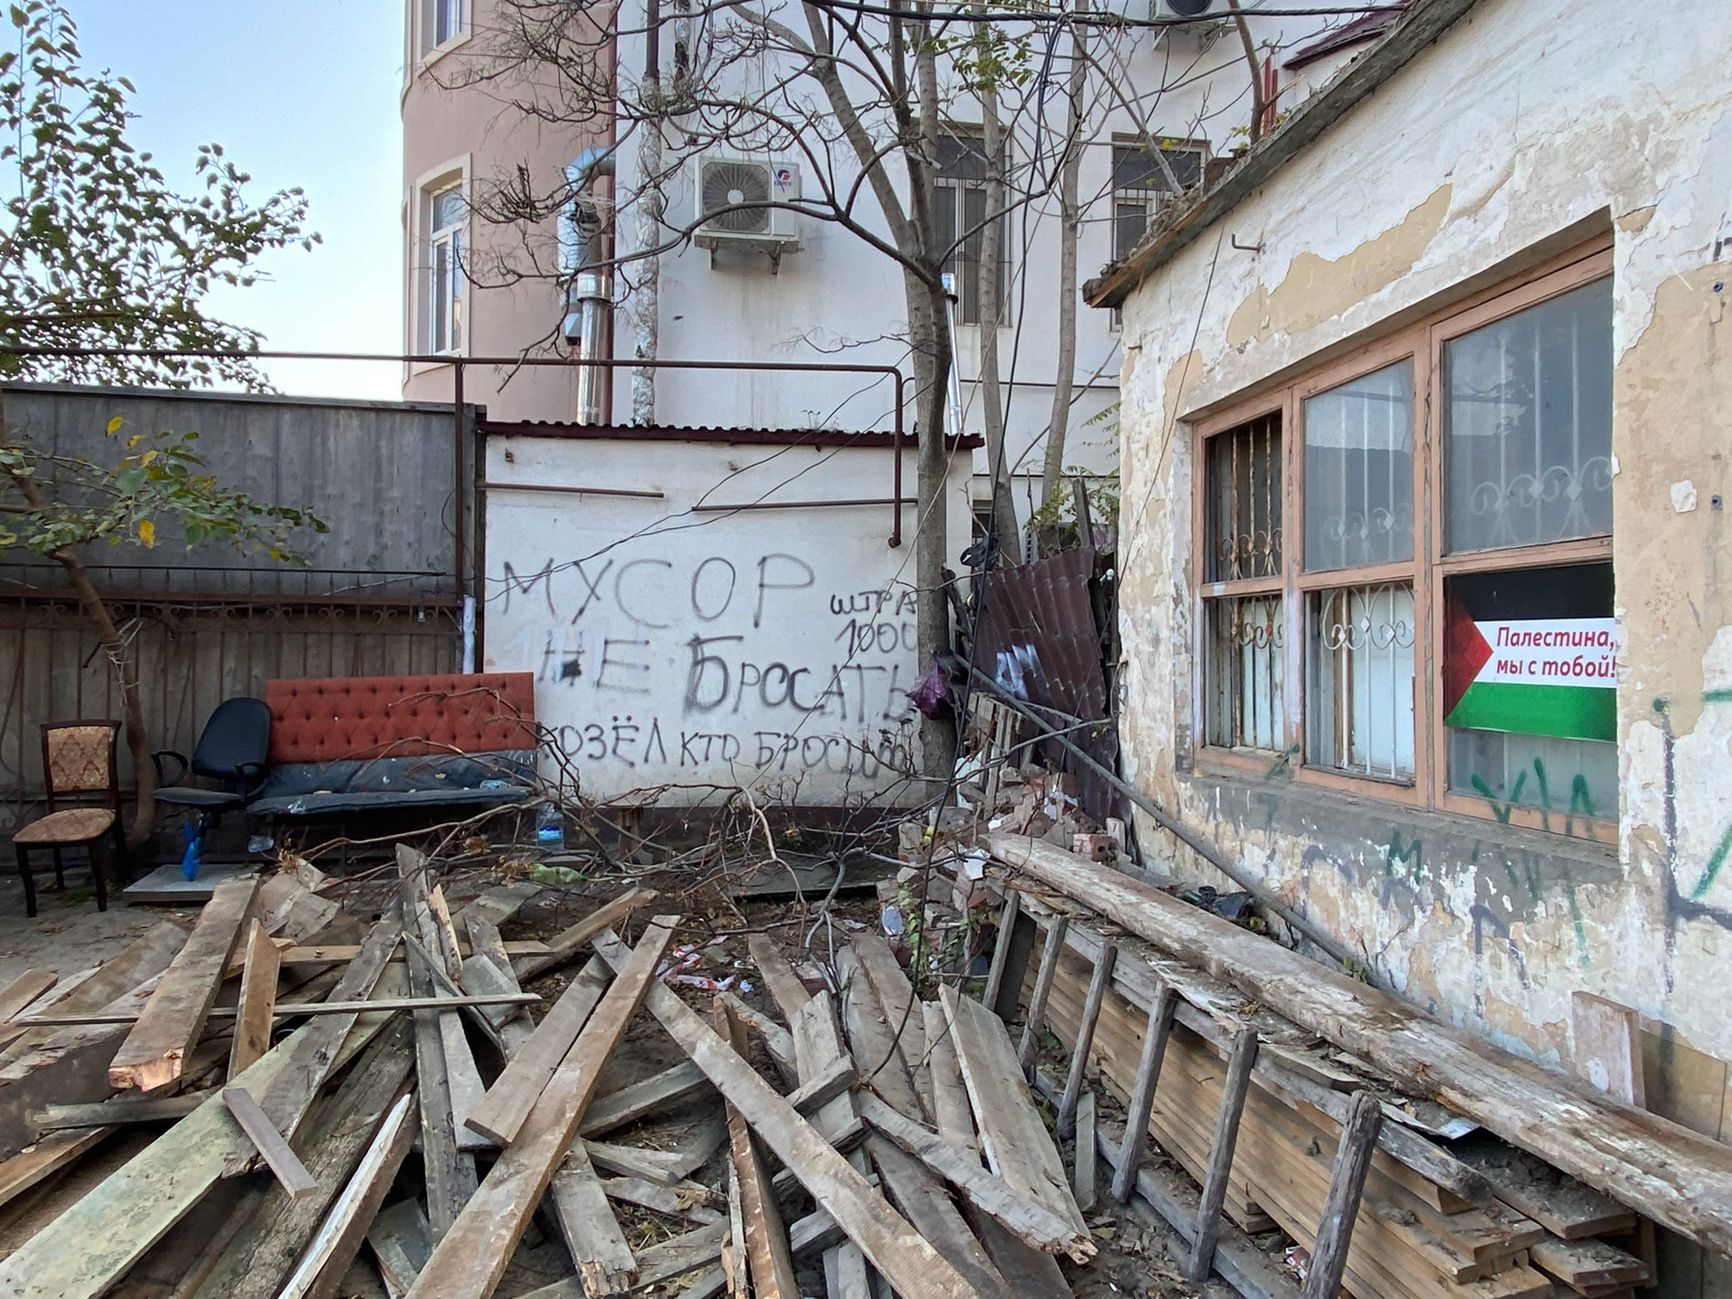 A poster in support of Palestine in a courtyard on Gamidov Avenue, Makhachkala